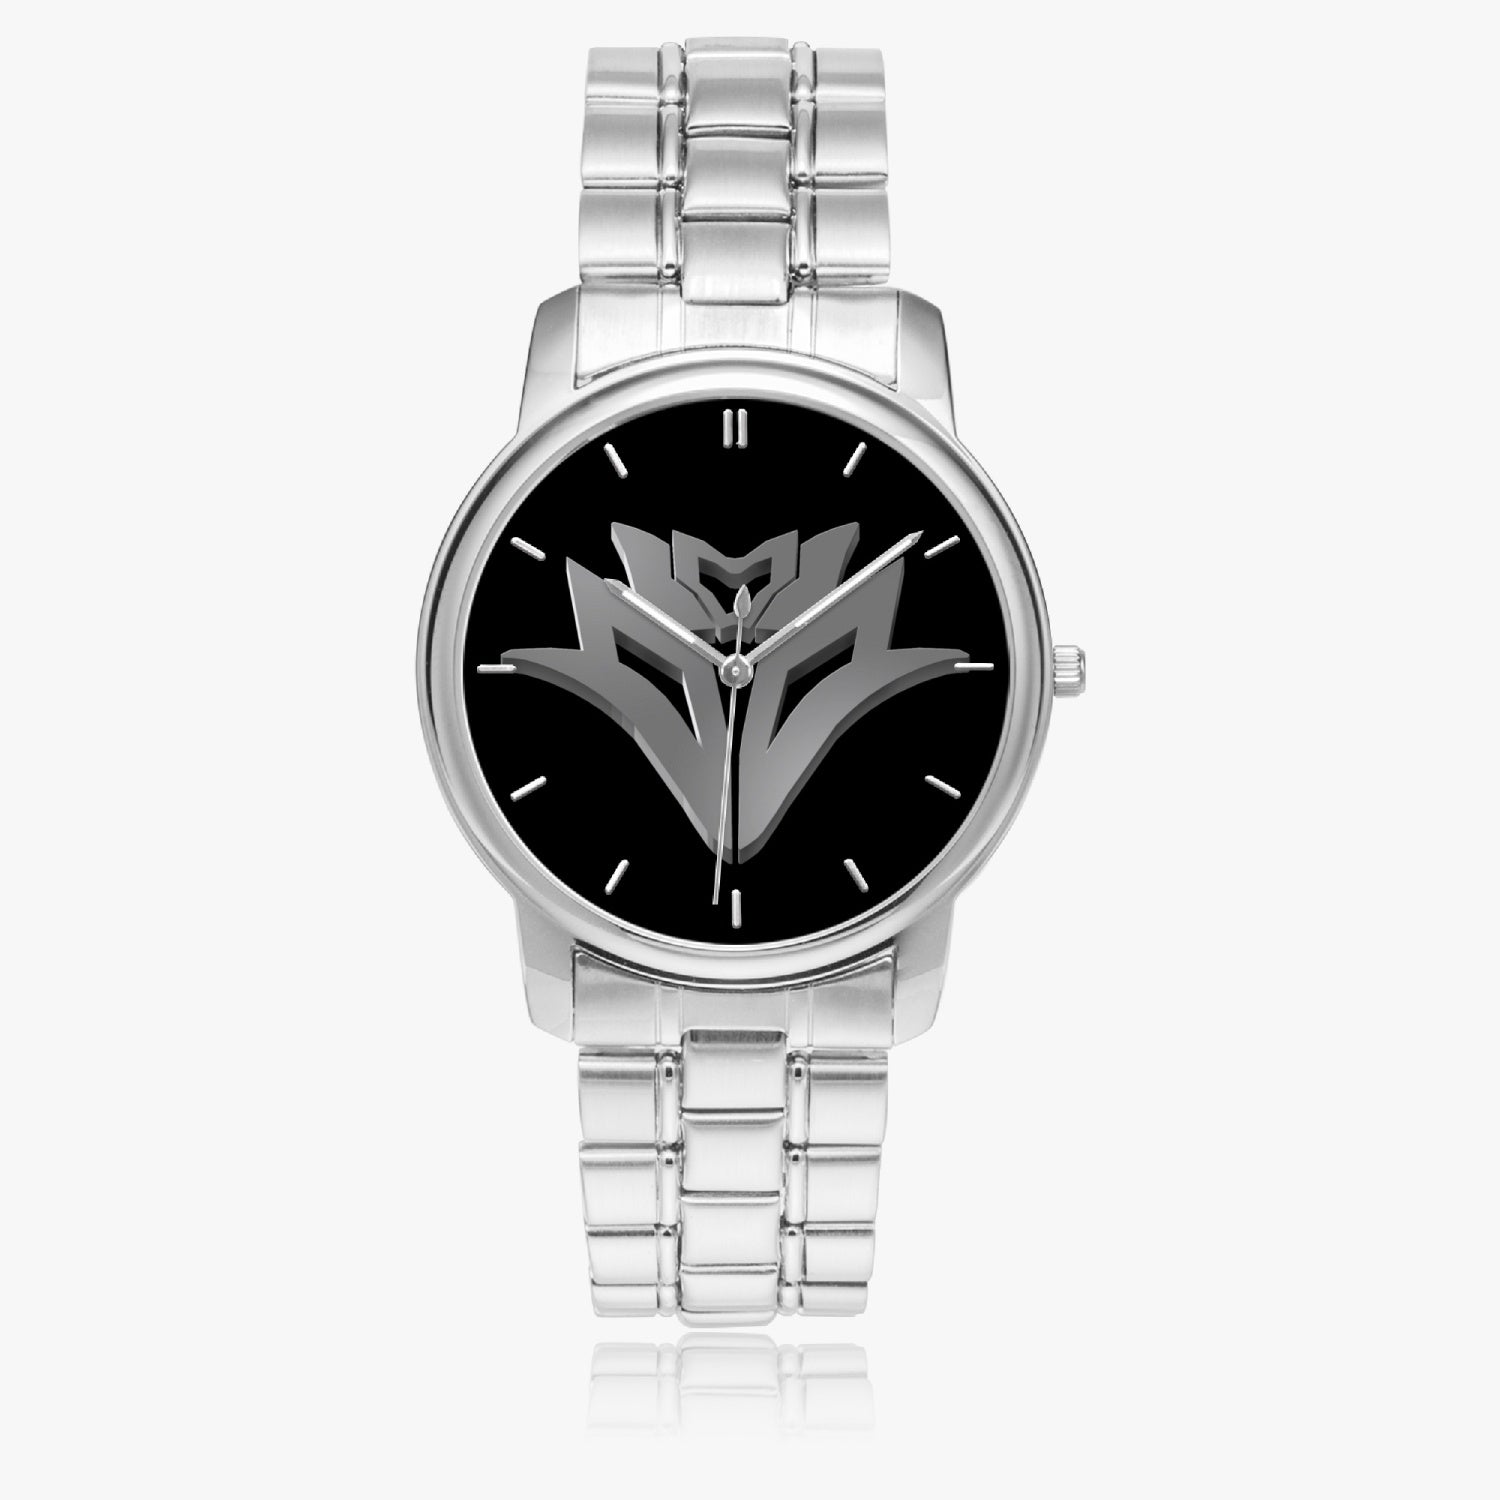 almr Stainless Steel Quartz Watch (With Indicators)